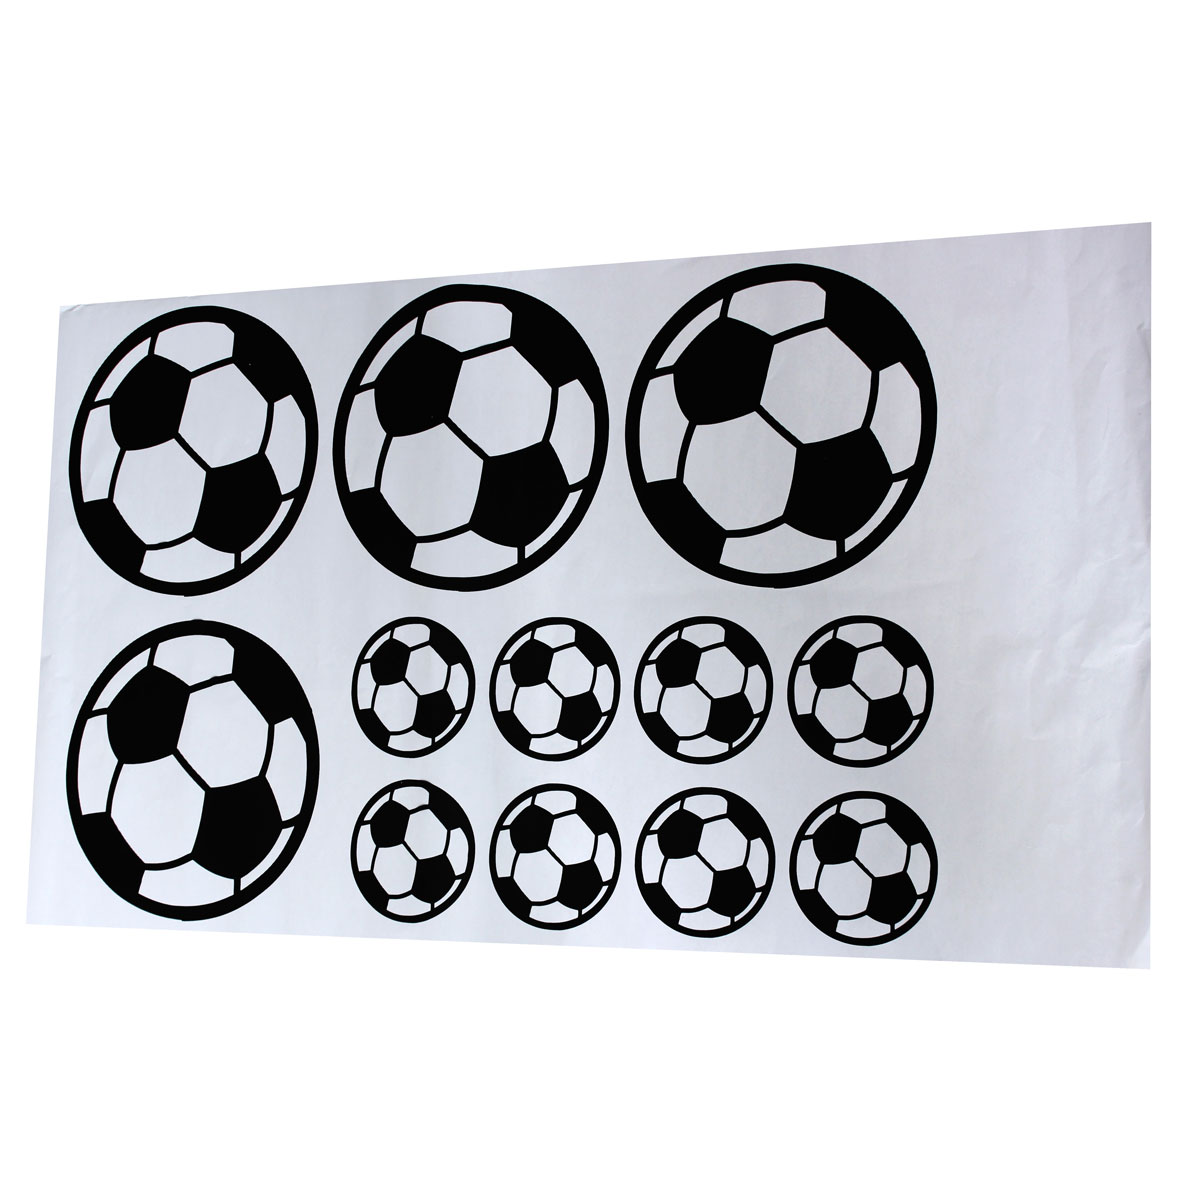 12PcsSet-Football-Soccer-Wall-Stickers-Children-Nursery-Kids-Room-Decals-Gift-Home-Decorations-1470248-3